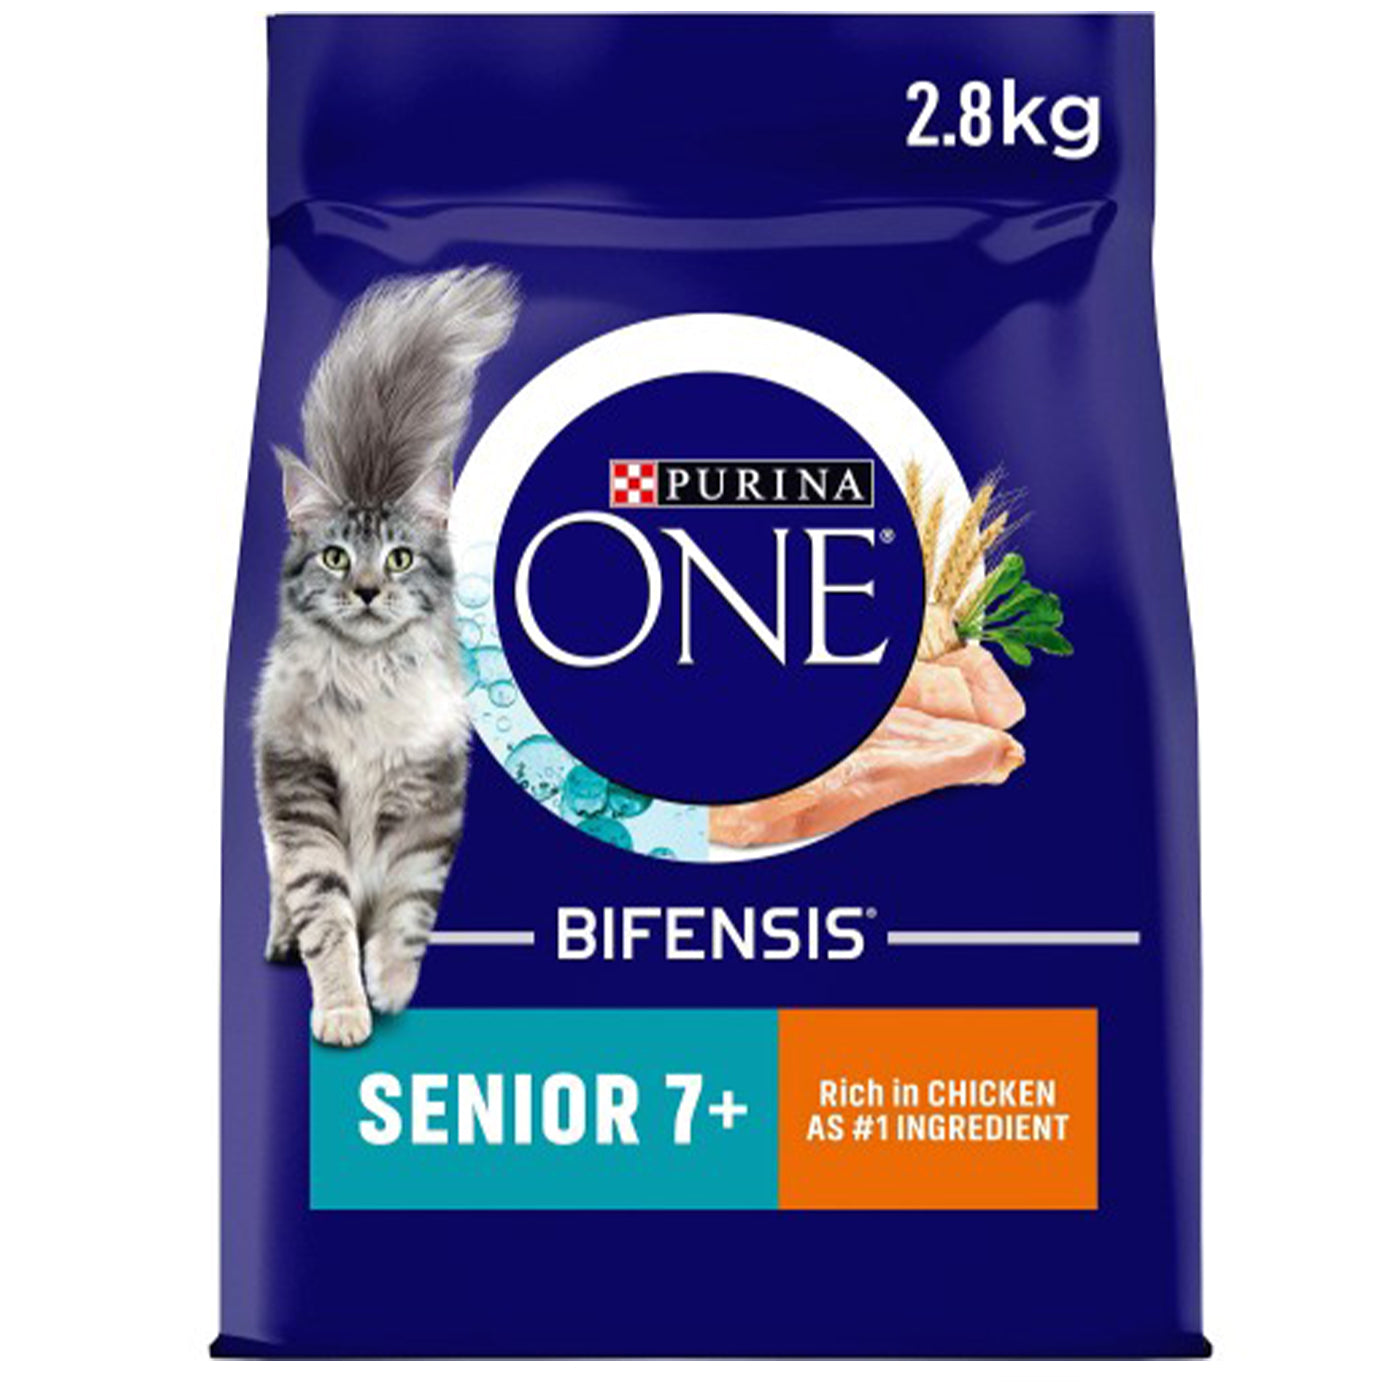 Purina One Senior 7+ Cat Chicken and Whole Grain 2.8KG